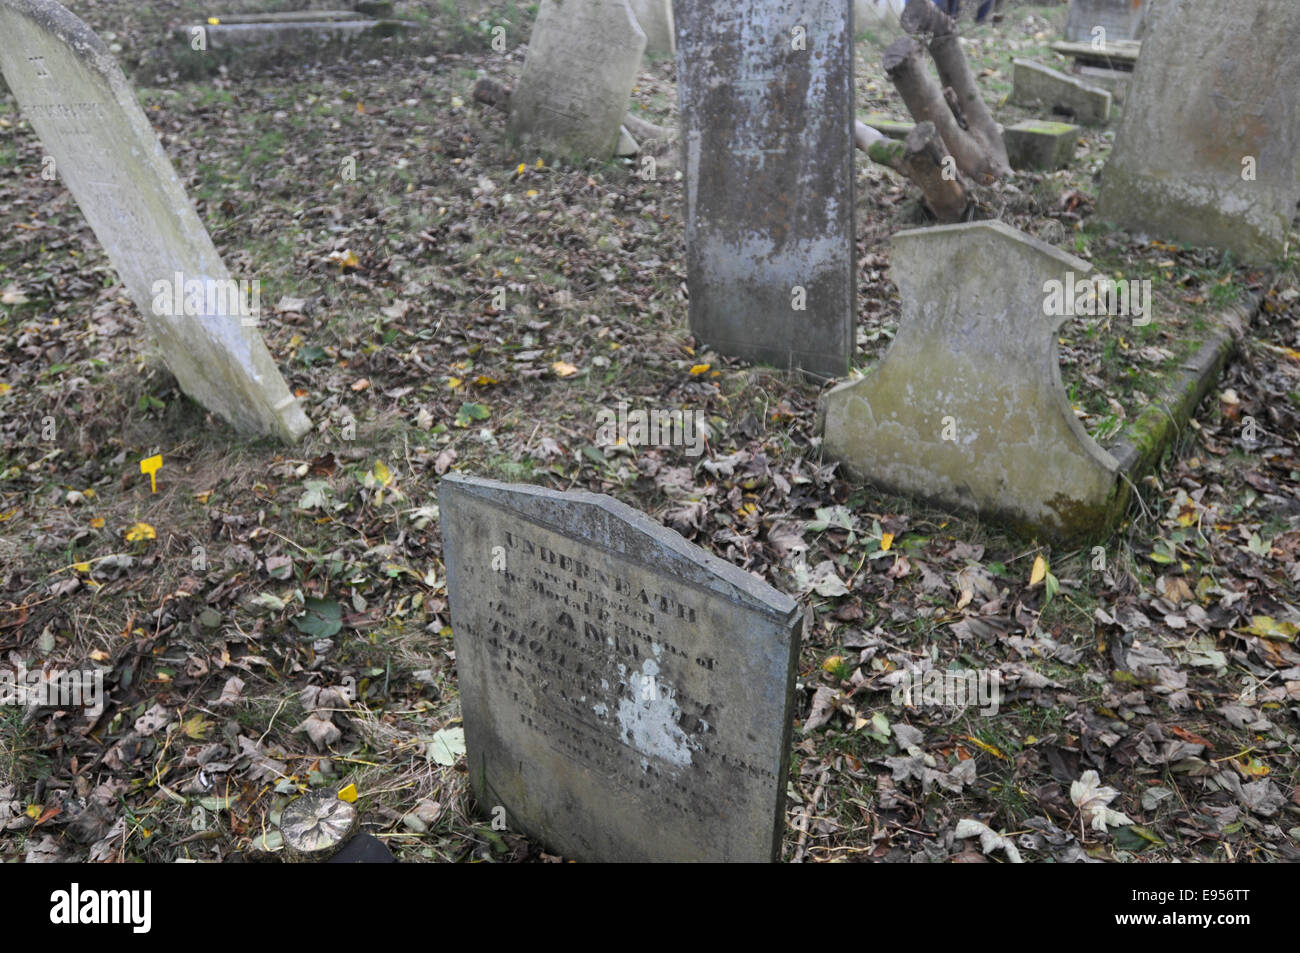 The Dissenters Cemetery ( the Congregationalist Cemetery) at Ponsharden, Falmouth, UK Opened 1808 abandoned 1930's Stock Photo